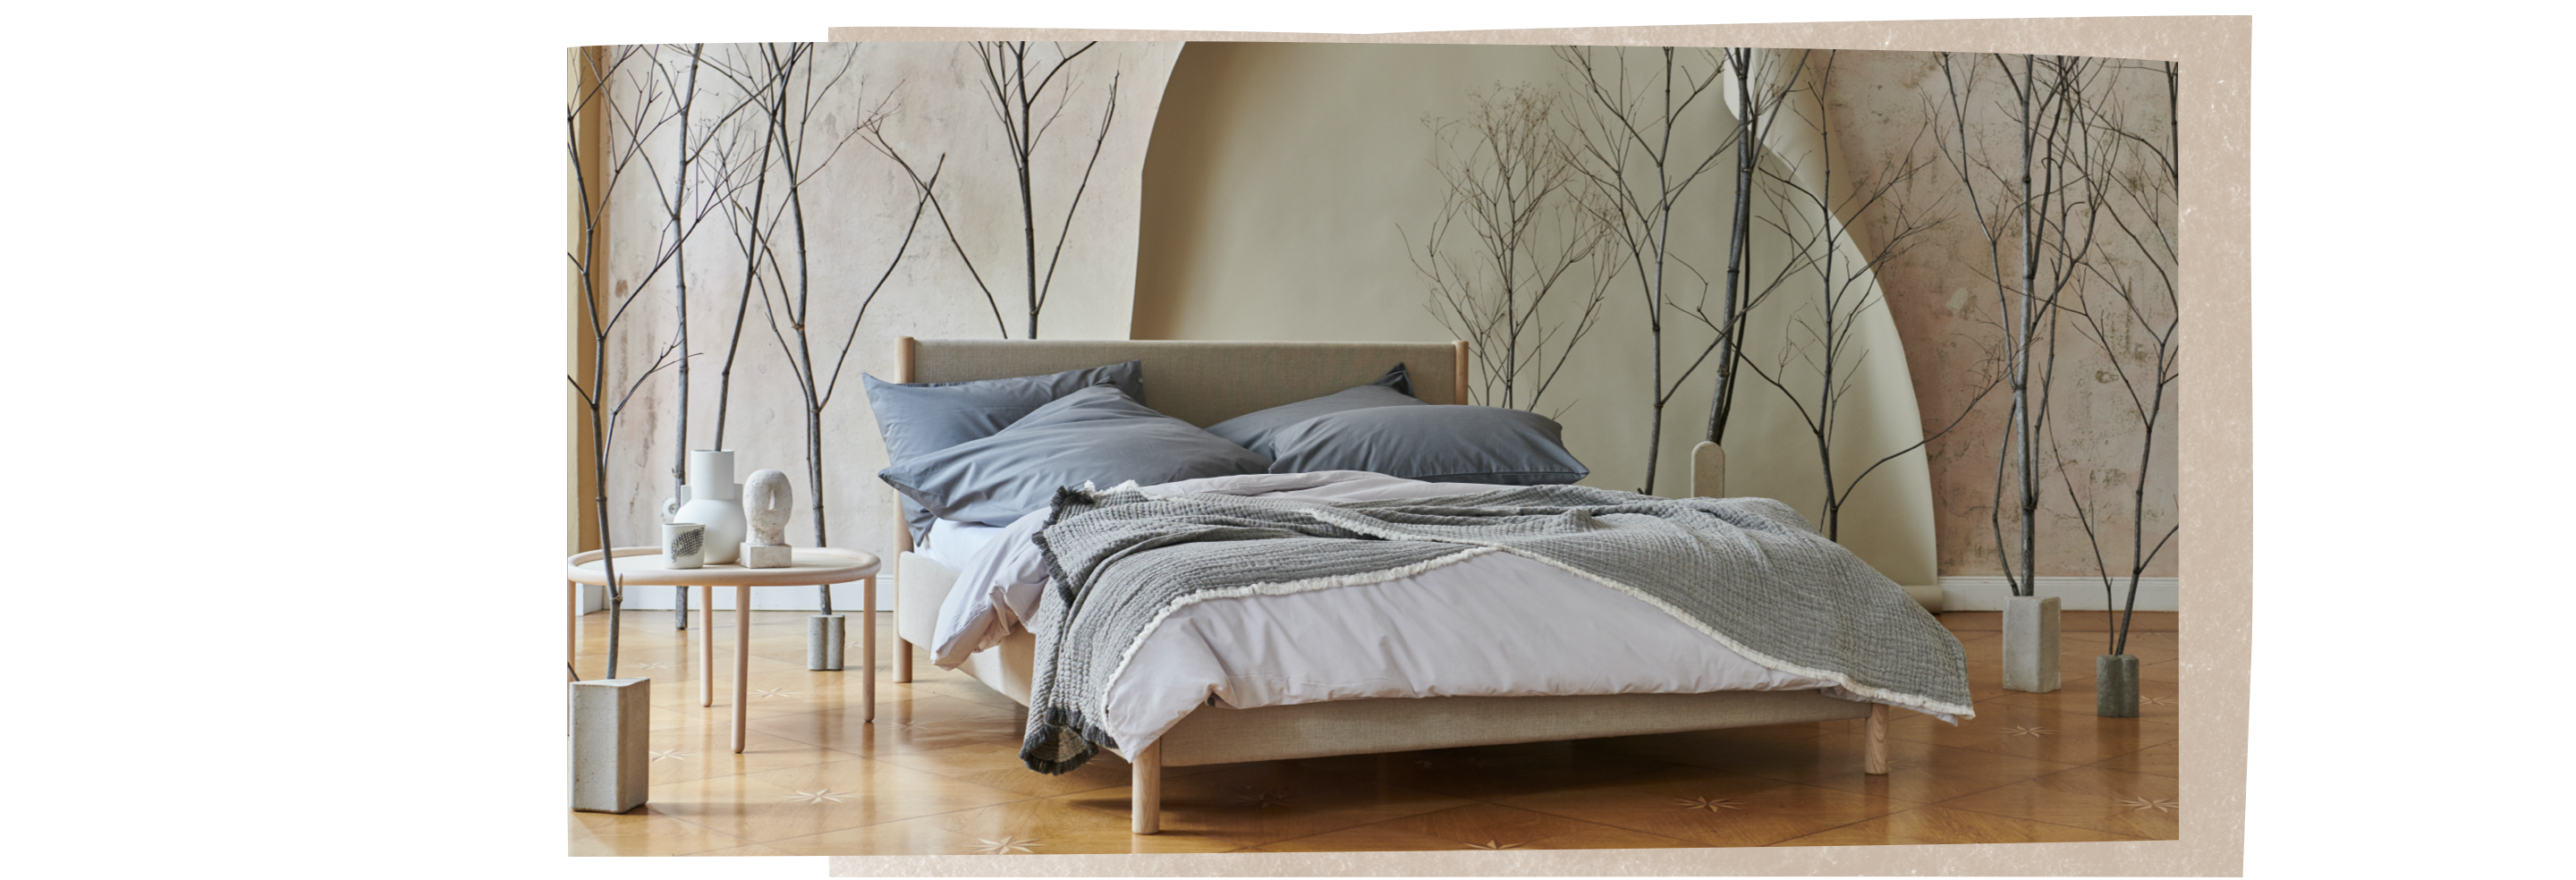 A bed with bed linen made of organic cotton